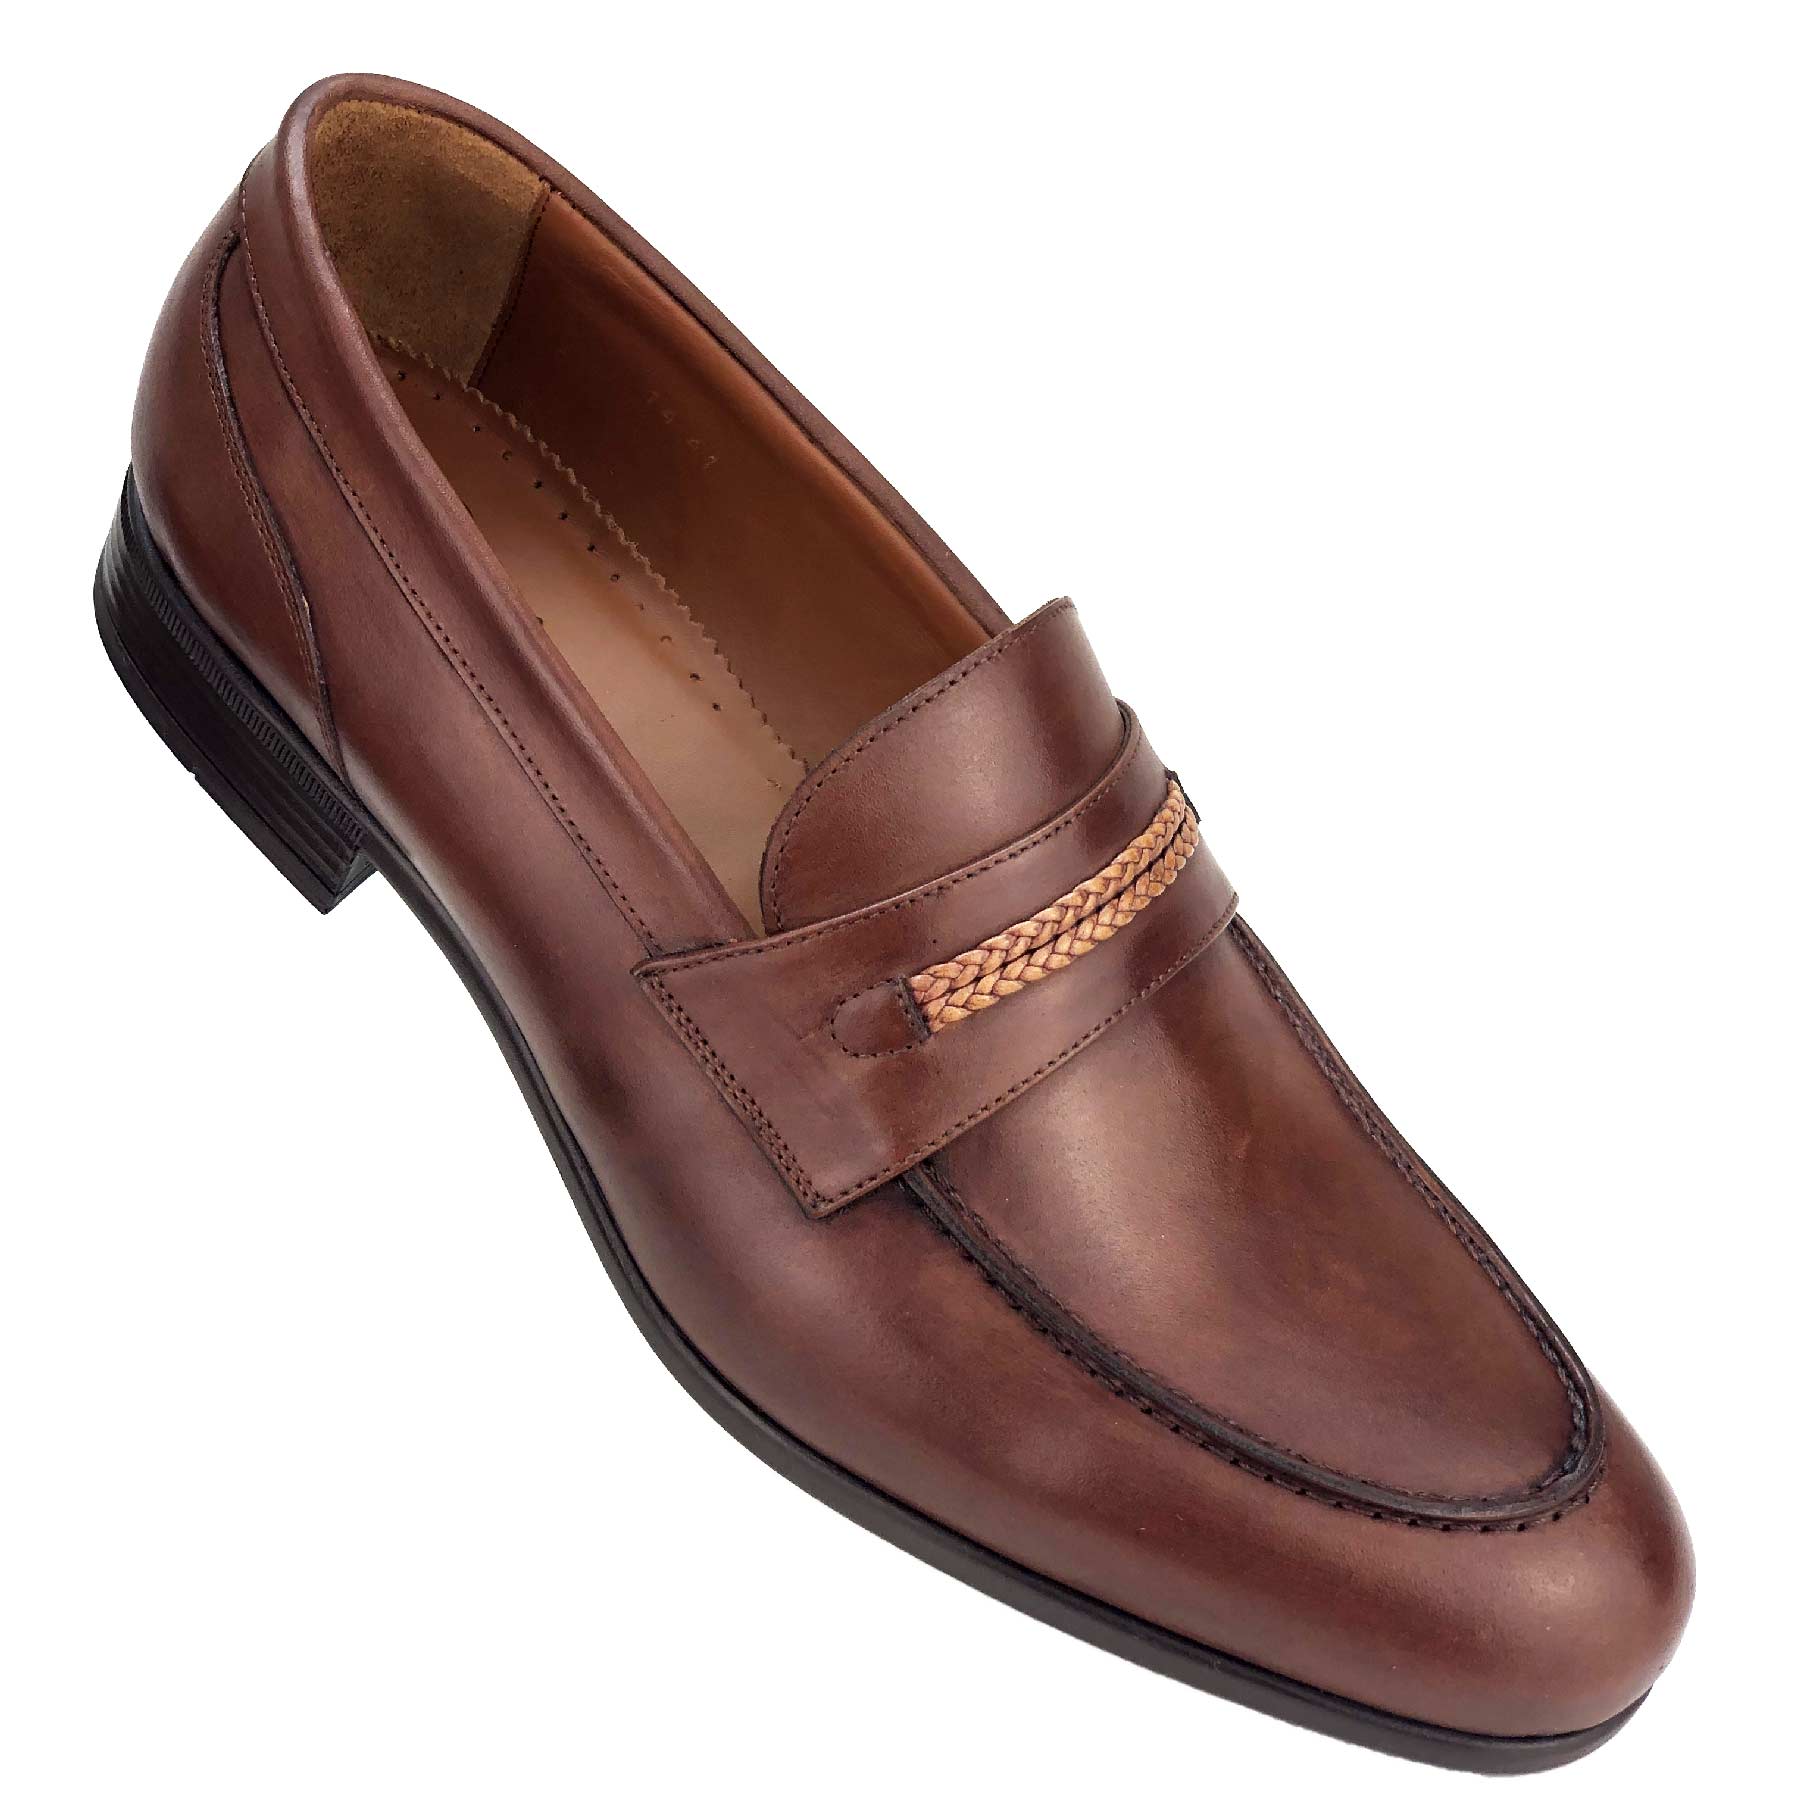 CH014-019  - Chaussure Cuir Taba - deluxe-maroc